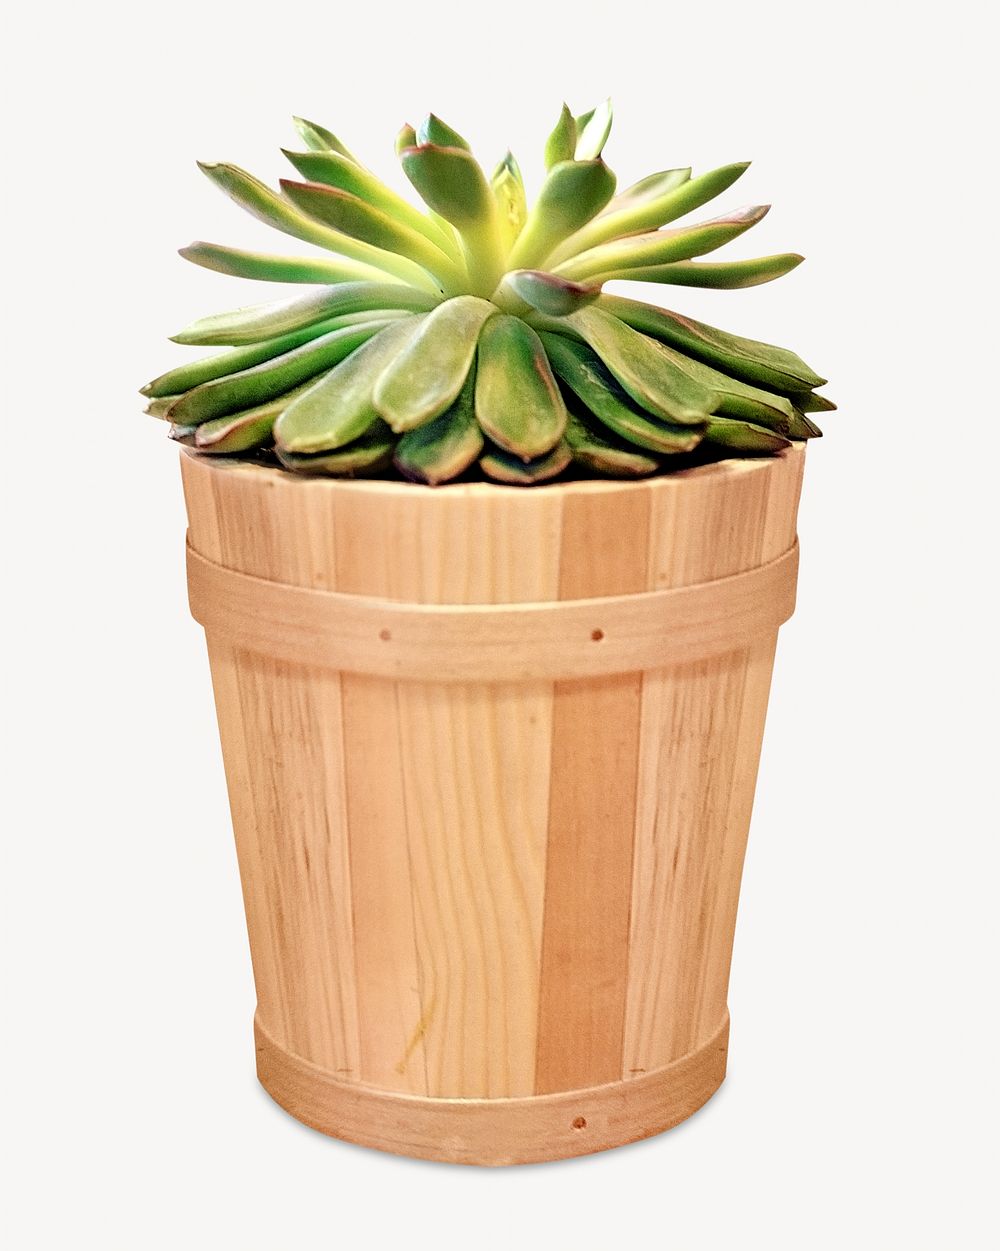 Potted plant, isolated object